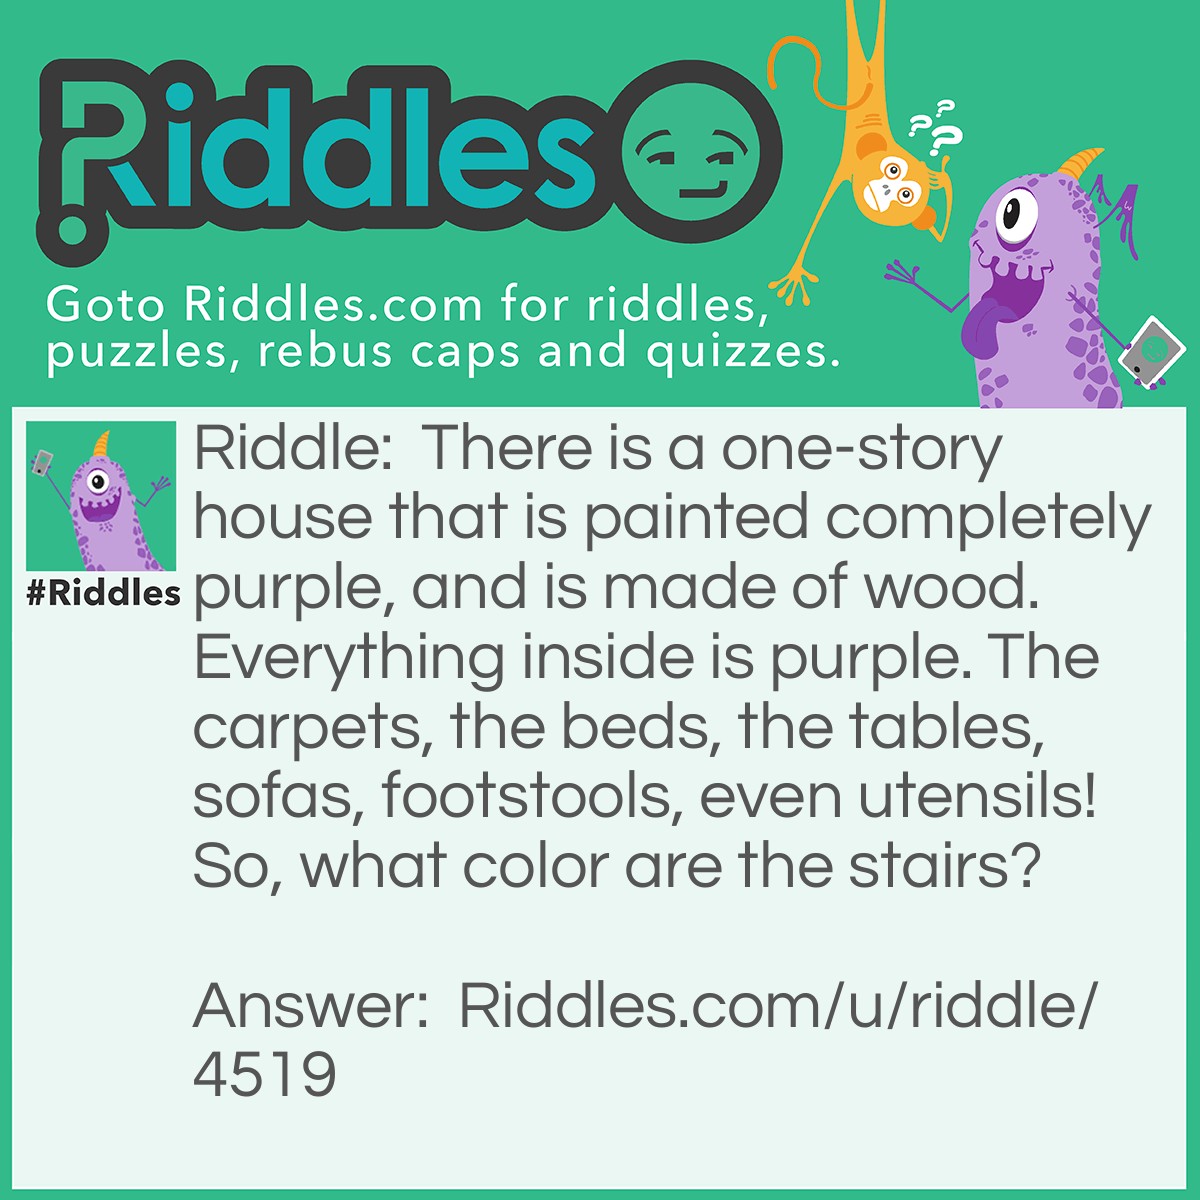 Riddle: There is a one-story house that is painted completely purple, and is made of wood. Everything inside is purple. The carpets, the beds, the tables, sofas, footstools, even utensils! So, what color are the stairs? Answer: Non-existent. It's a 1 story house, remember?